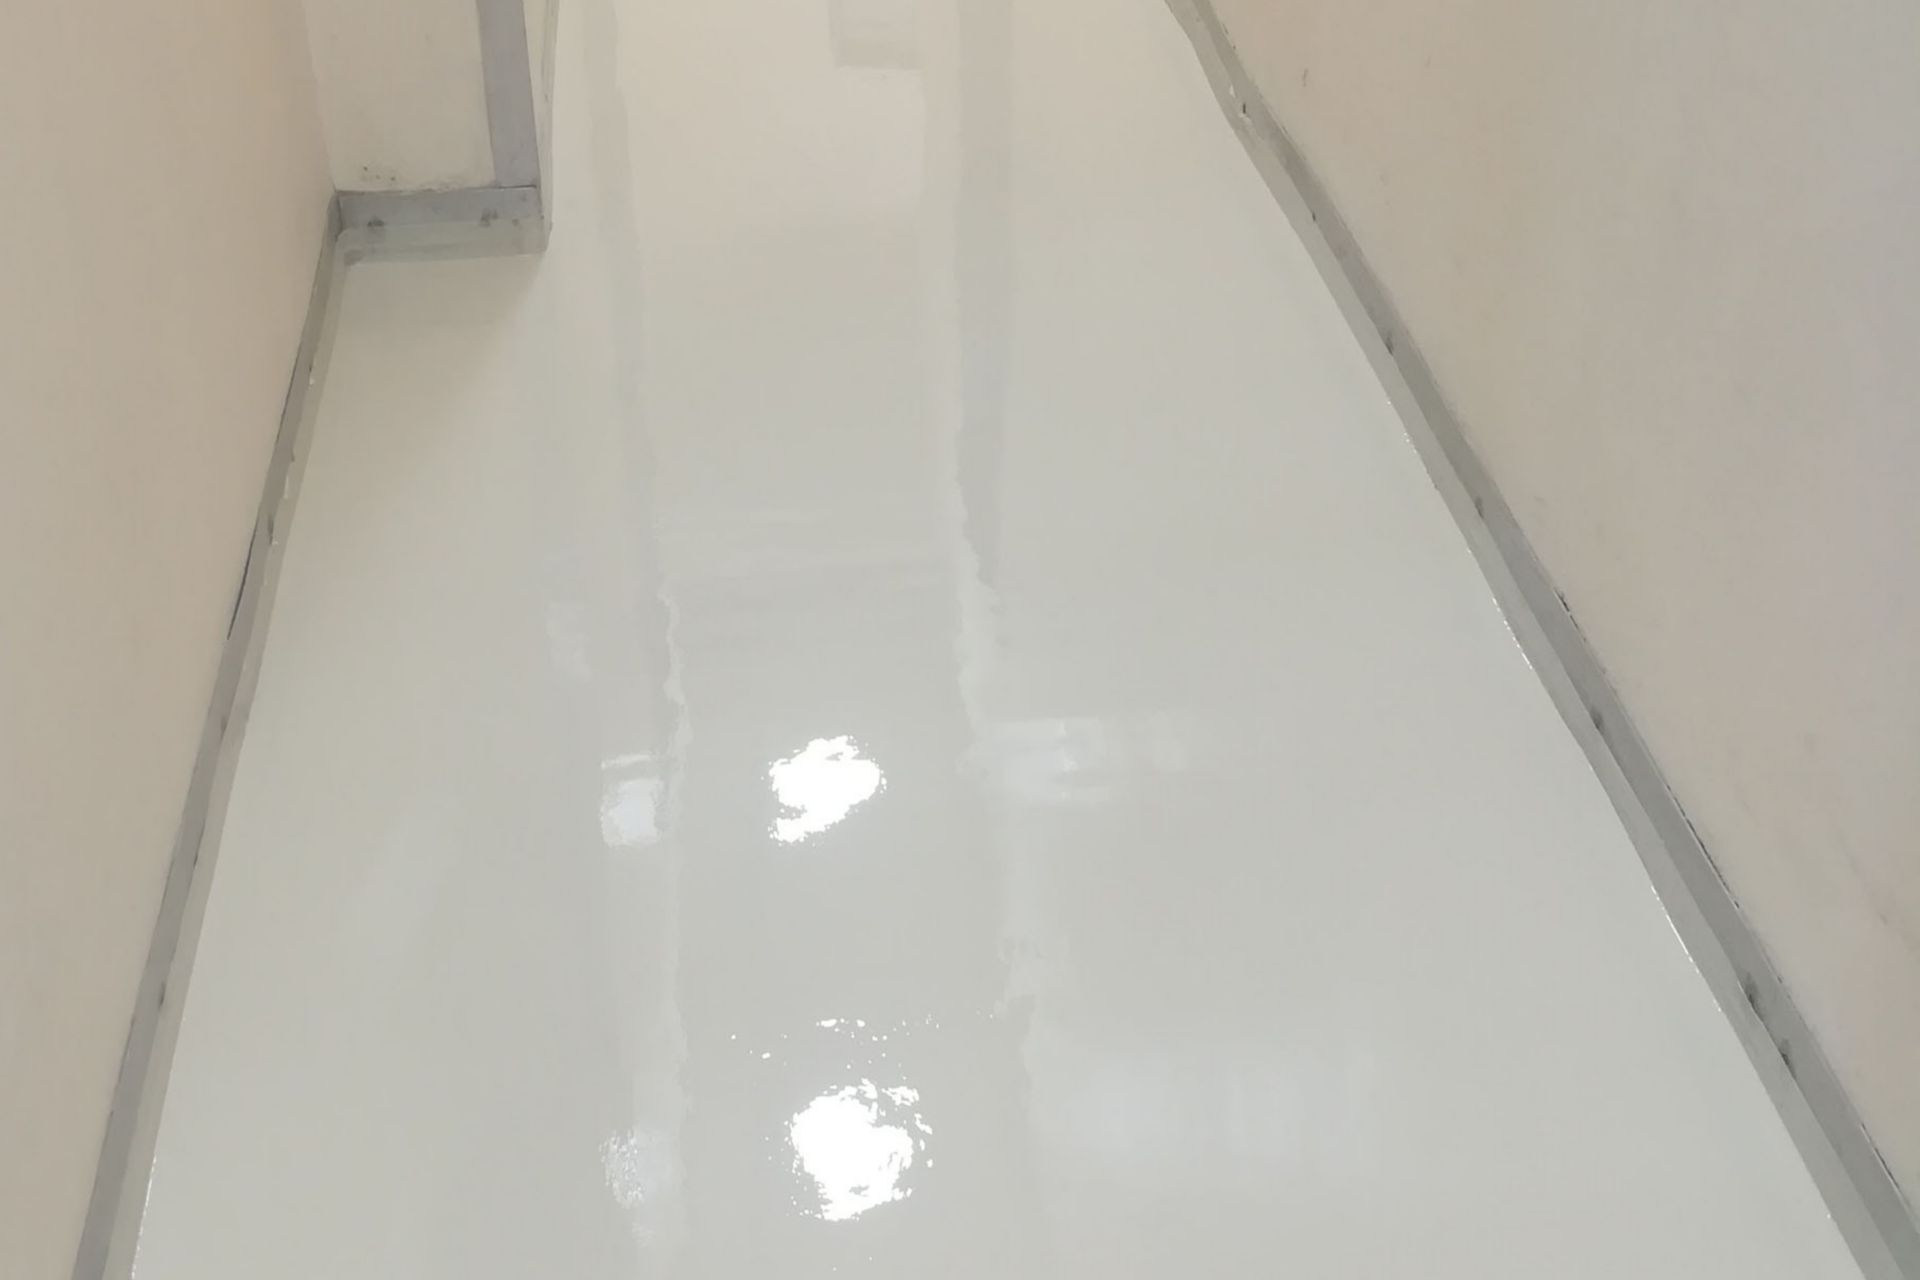 Completed electrostatic dissipative floor as Police Forensic Institute in Namibia